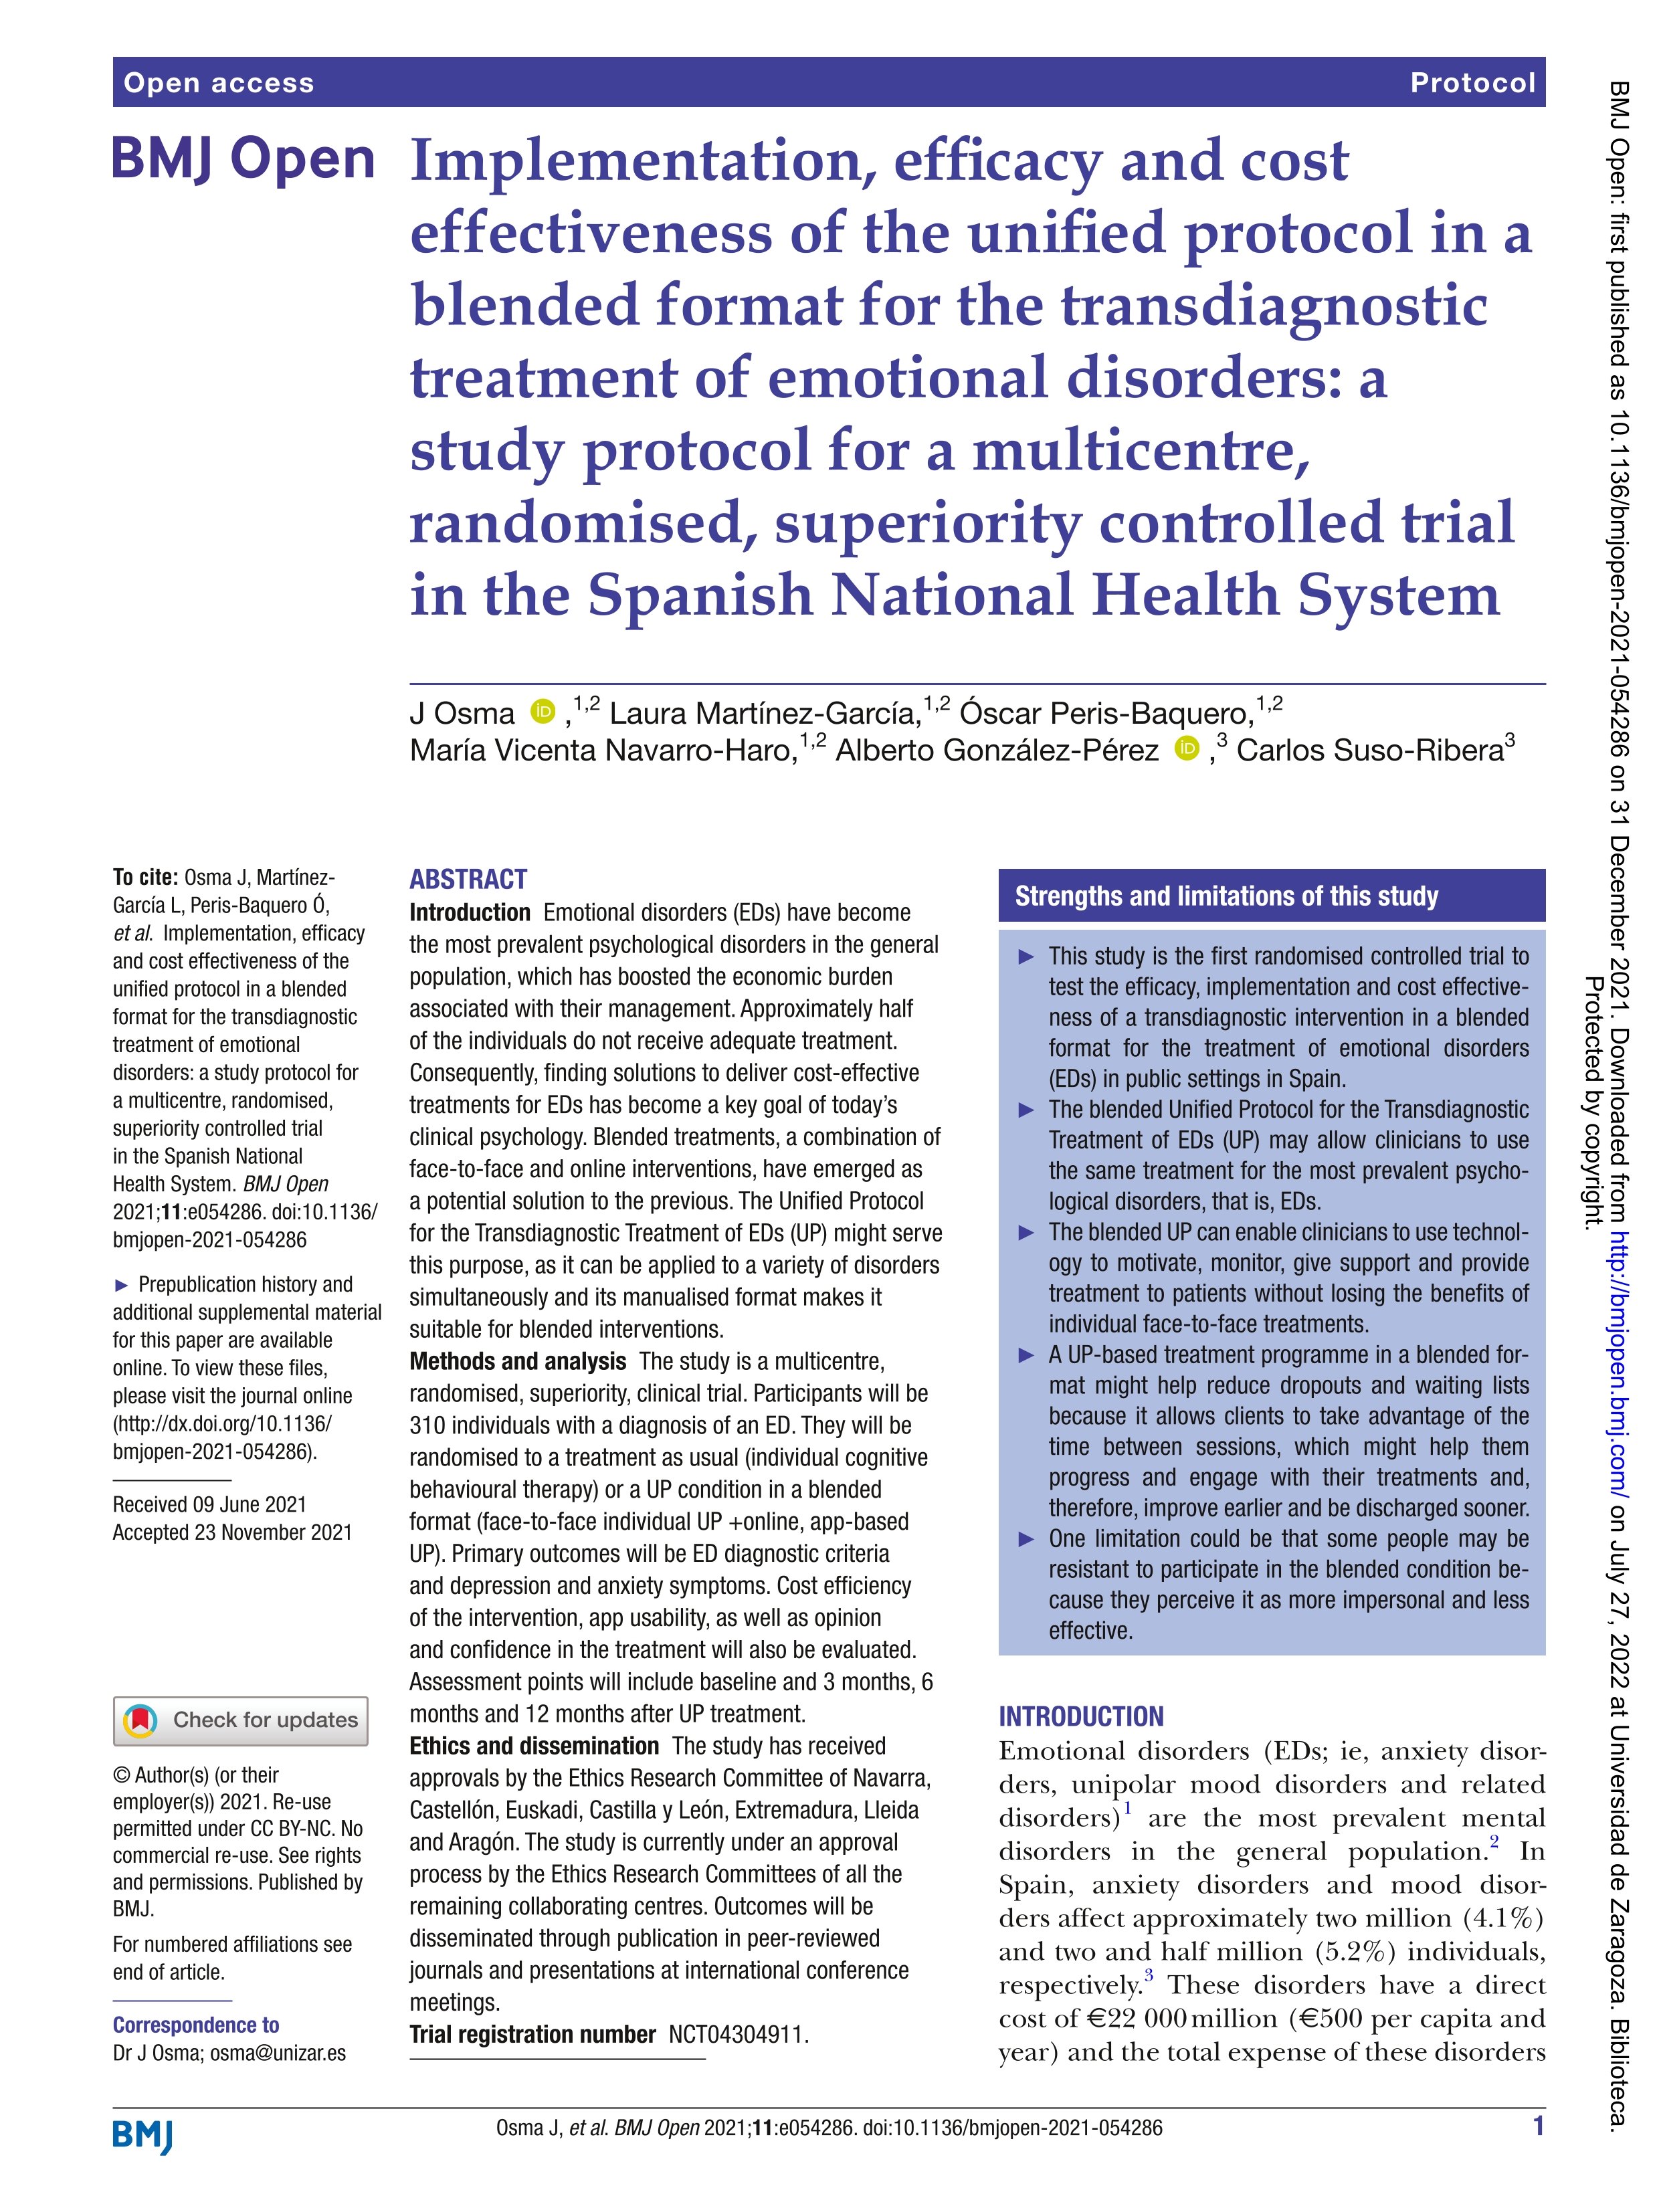 Implementation, efficacy and cost effectiveness of the unified protocol in a blended format for the transdiagnostic treatment of emotional disorders: a study protocol for a multicentre, randomised, superiority controlled trial in the Spanish National Health System